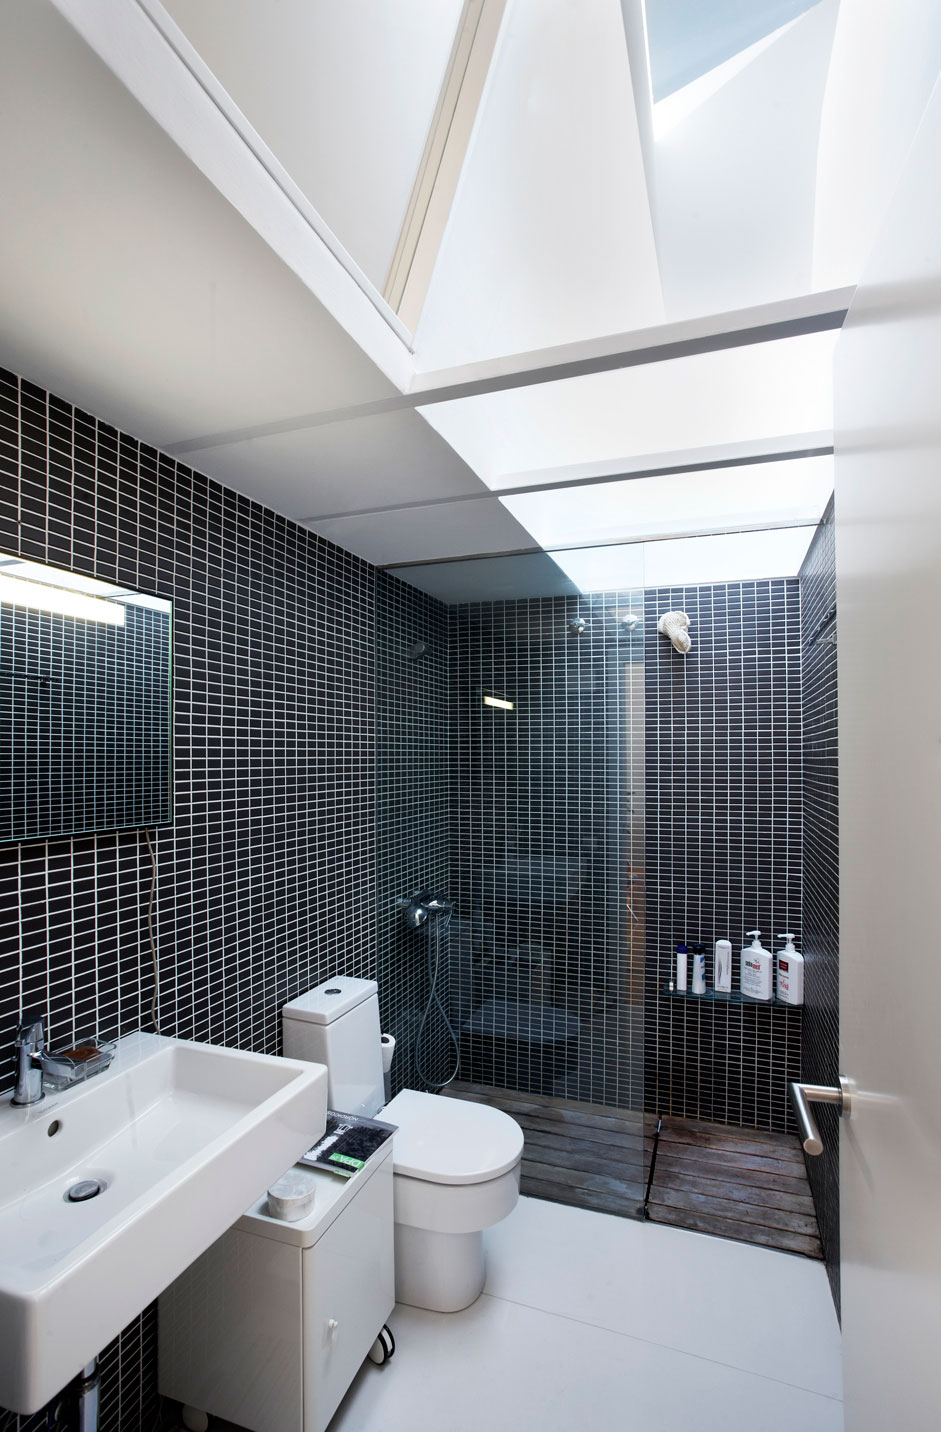 And Black Bathroom White And Black Interior Color Bathroom Design For Small Spaces With Mosaic Wall Tiles Plus Glass Ceiling Panels Architecture Comfortable Countryside Home With Exposed Brick Walls And Wood Beams